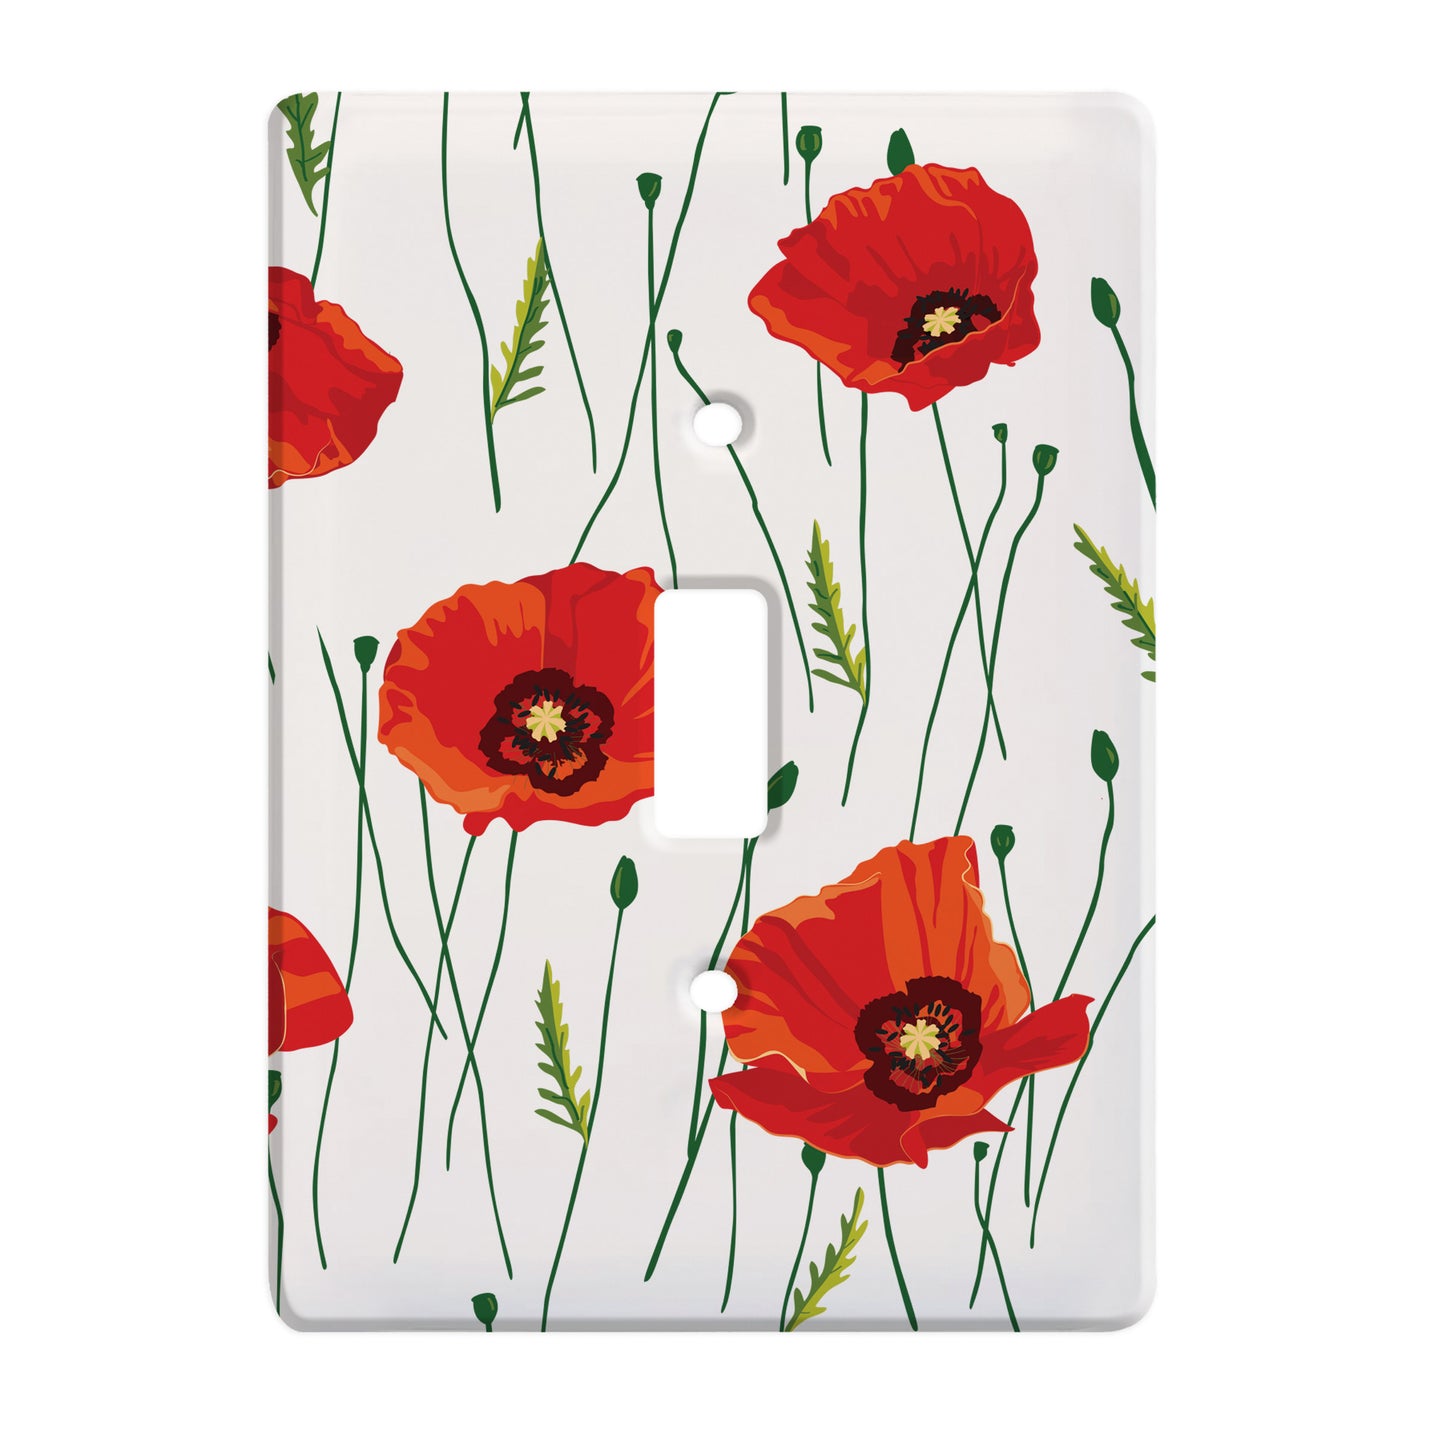 white ceramic single toggle switch plate featuring red poppy flowers.